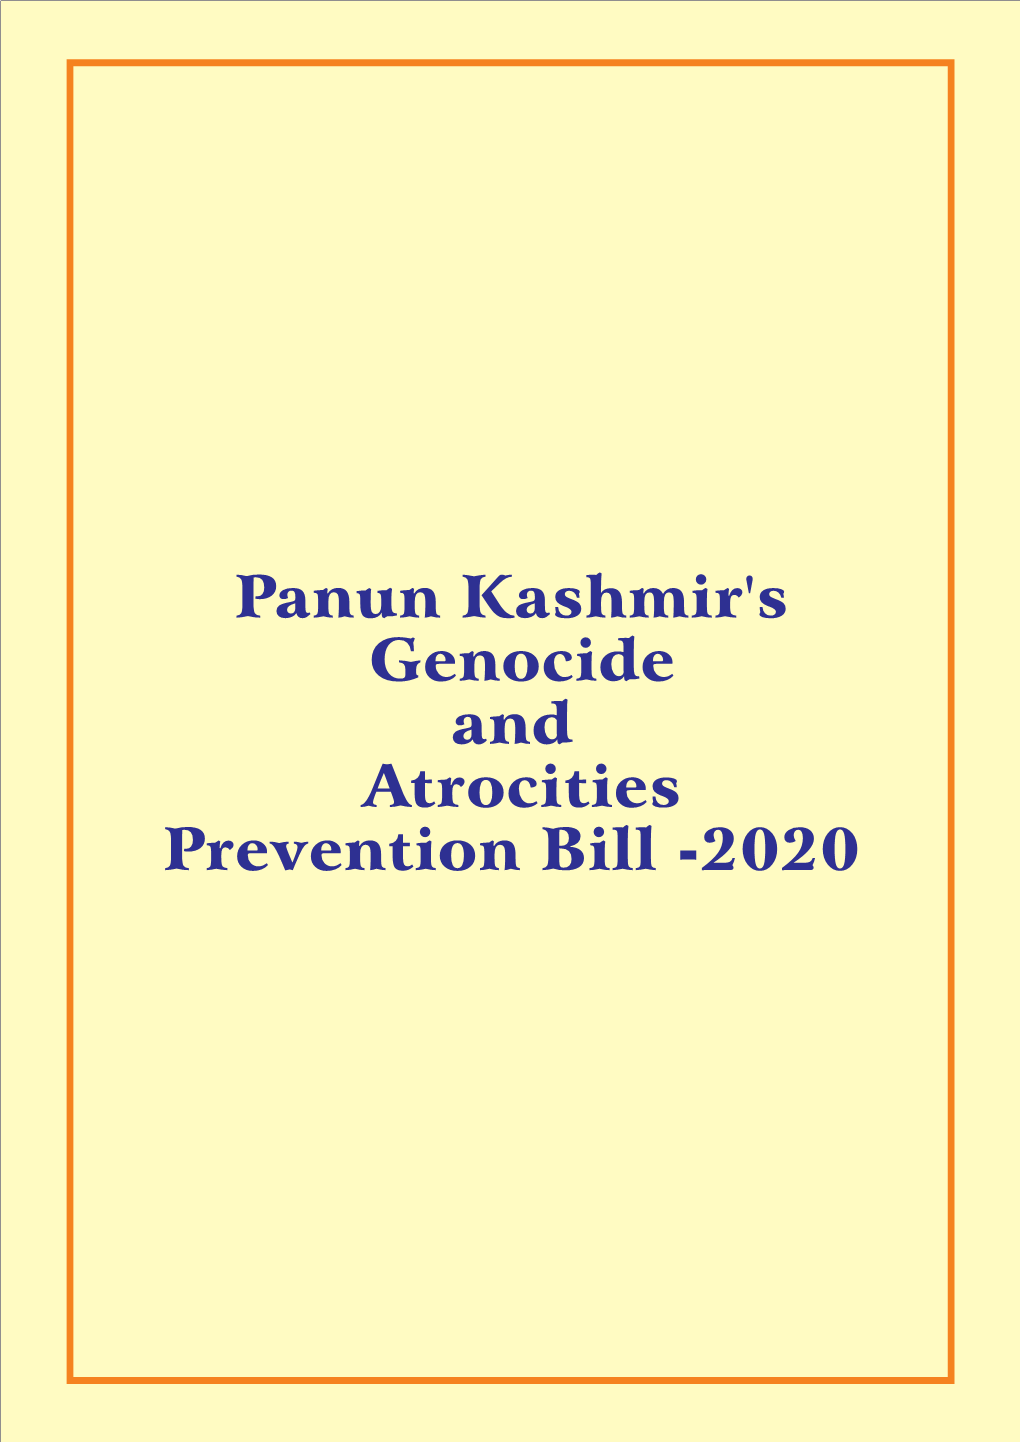 Panun Kashmir's Genocide and Atrocities Prevention Bill -2020 PREAMBLE